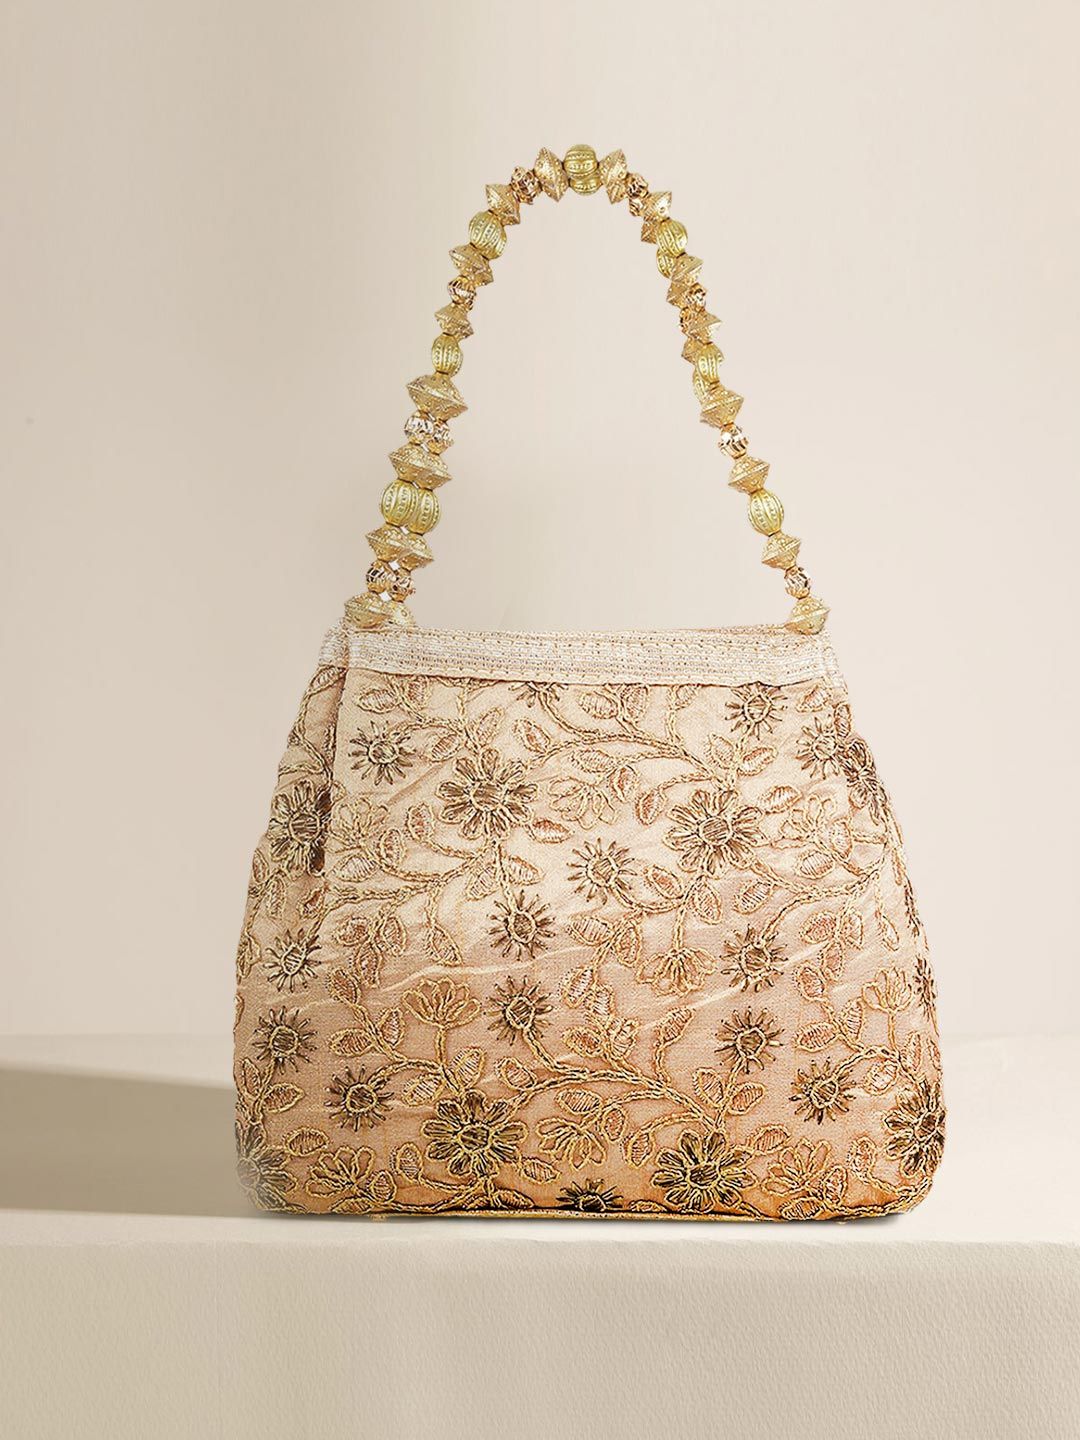 Metro Gold-Toned Floral Structured Handheld Bag with Applique Price in India